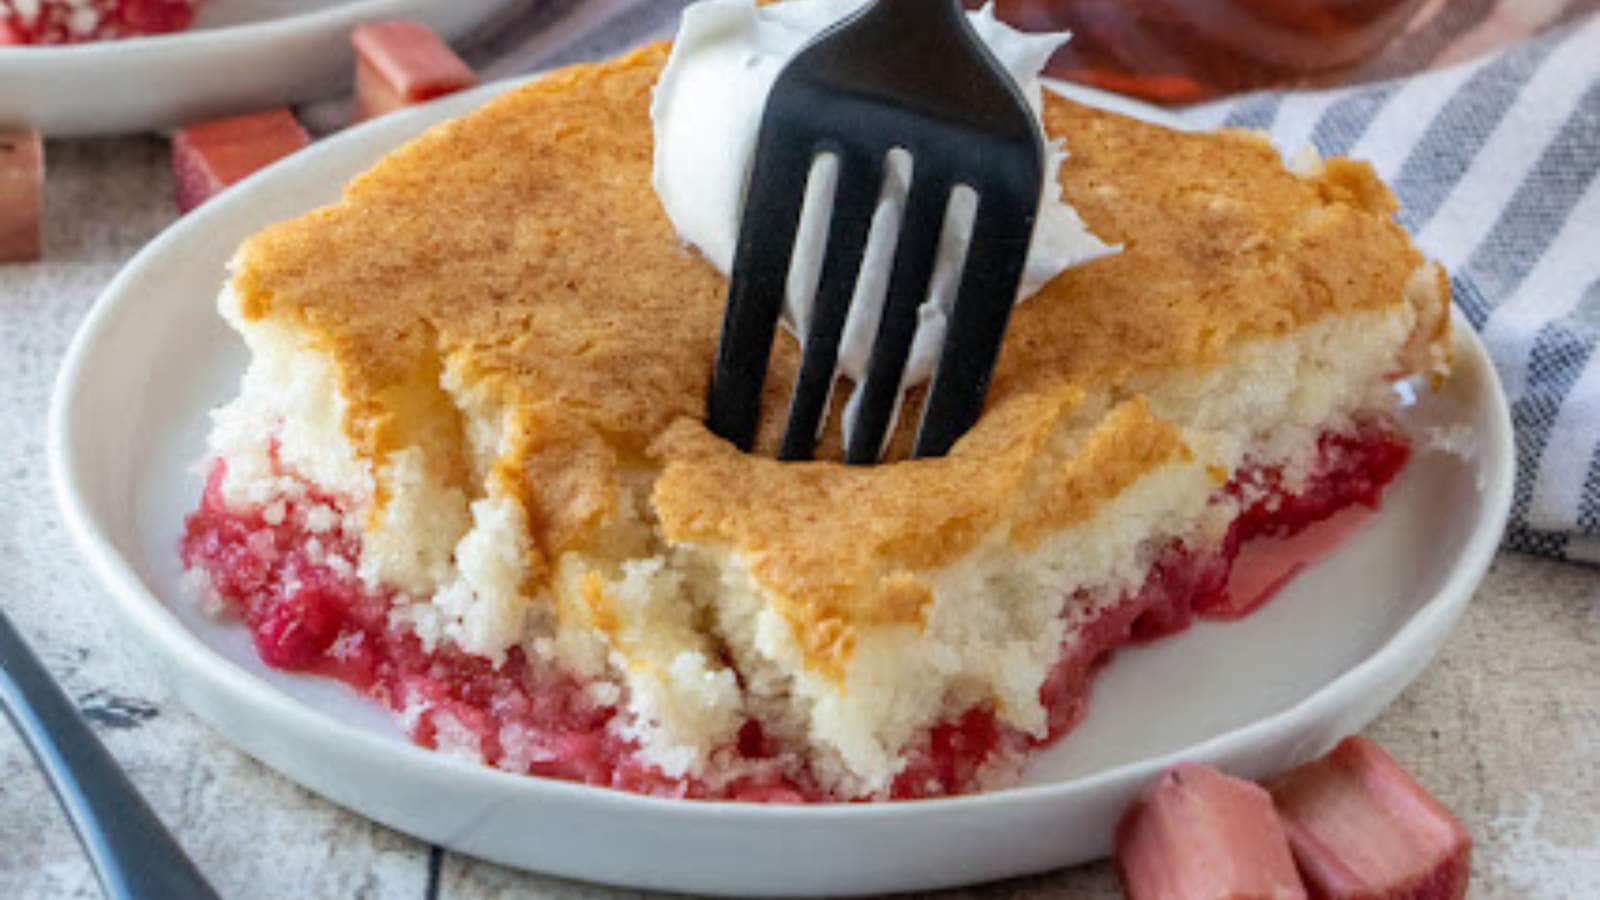 Rhubarb Dump Cake Recipe by Hot And Cool Reads.